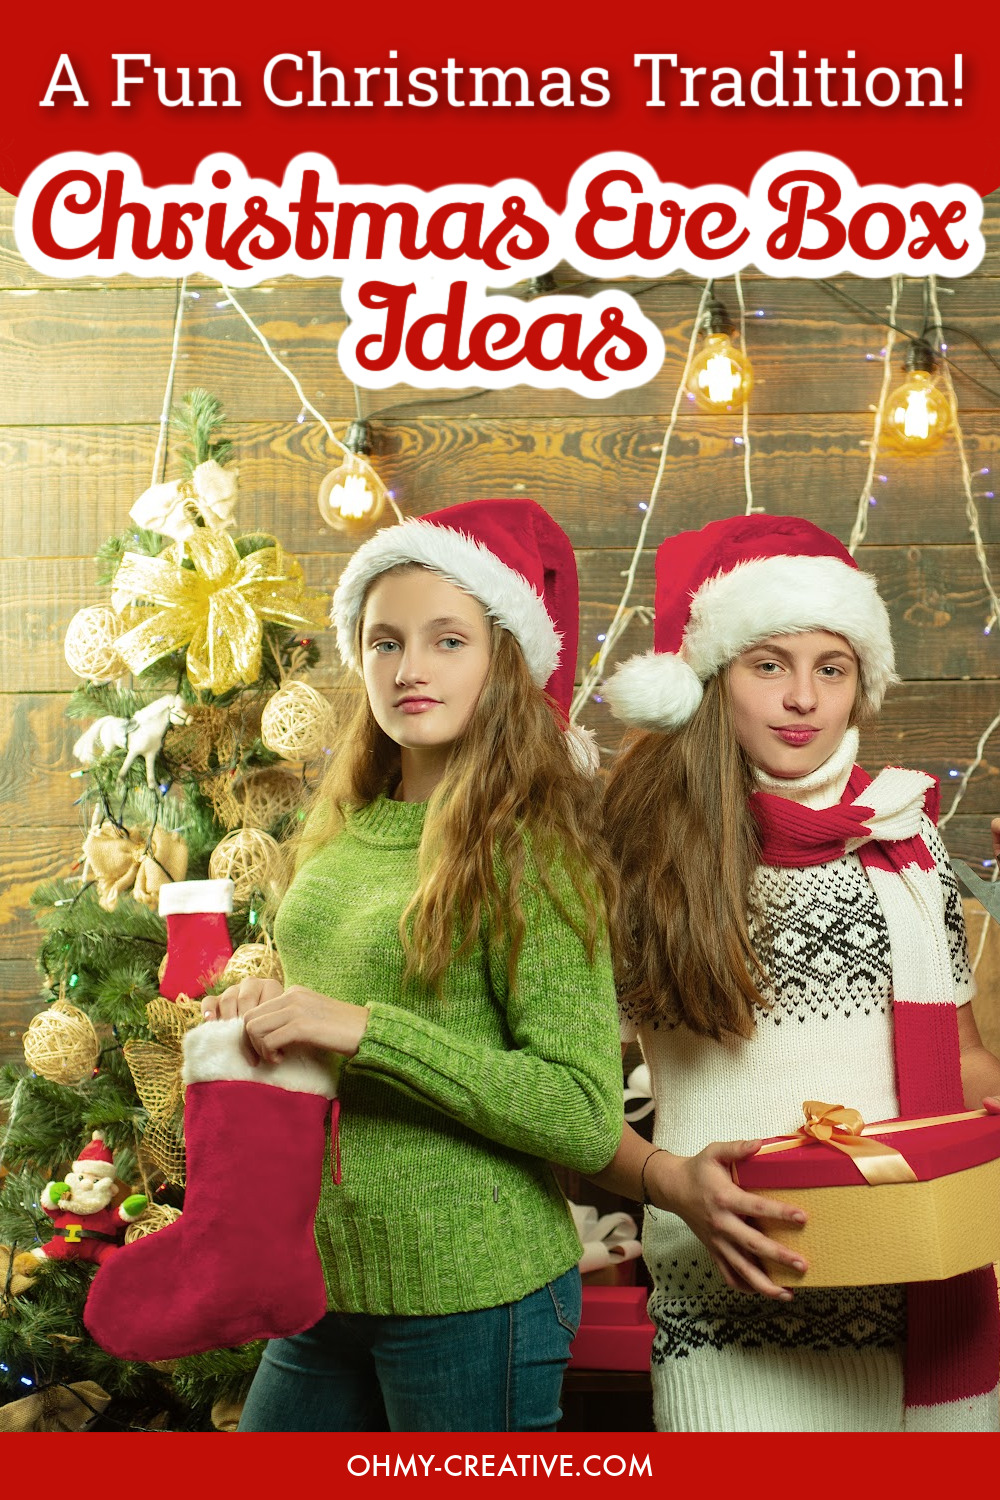 Two teens standing in front of a Christmas tree holding a Christmas Eve Box gift.